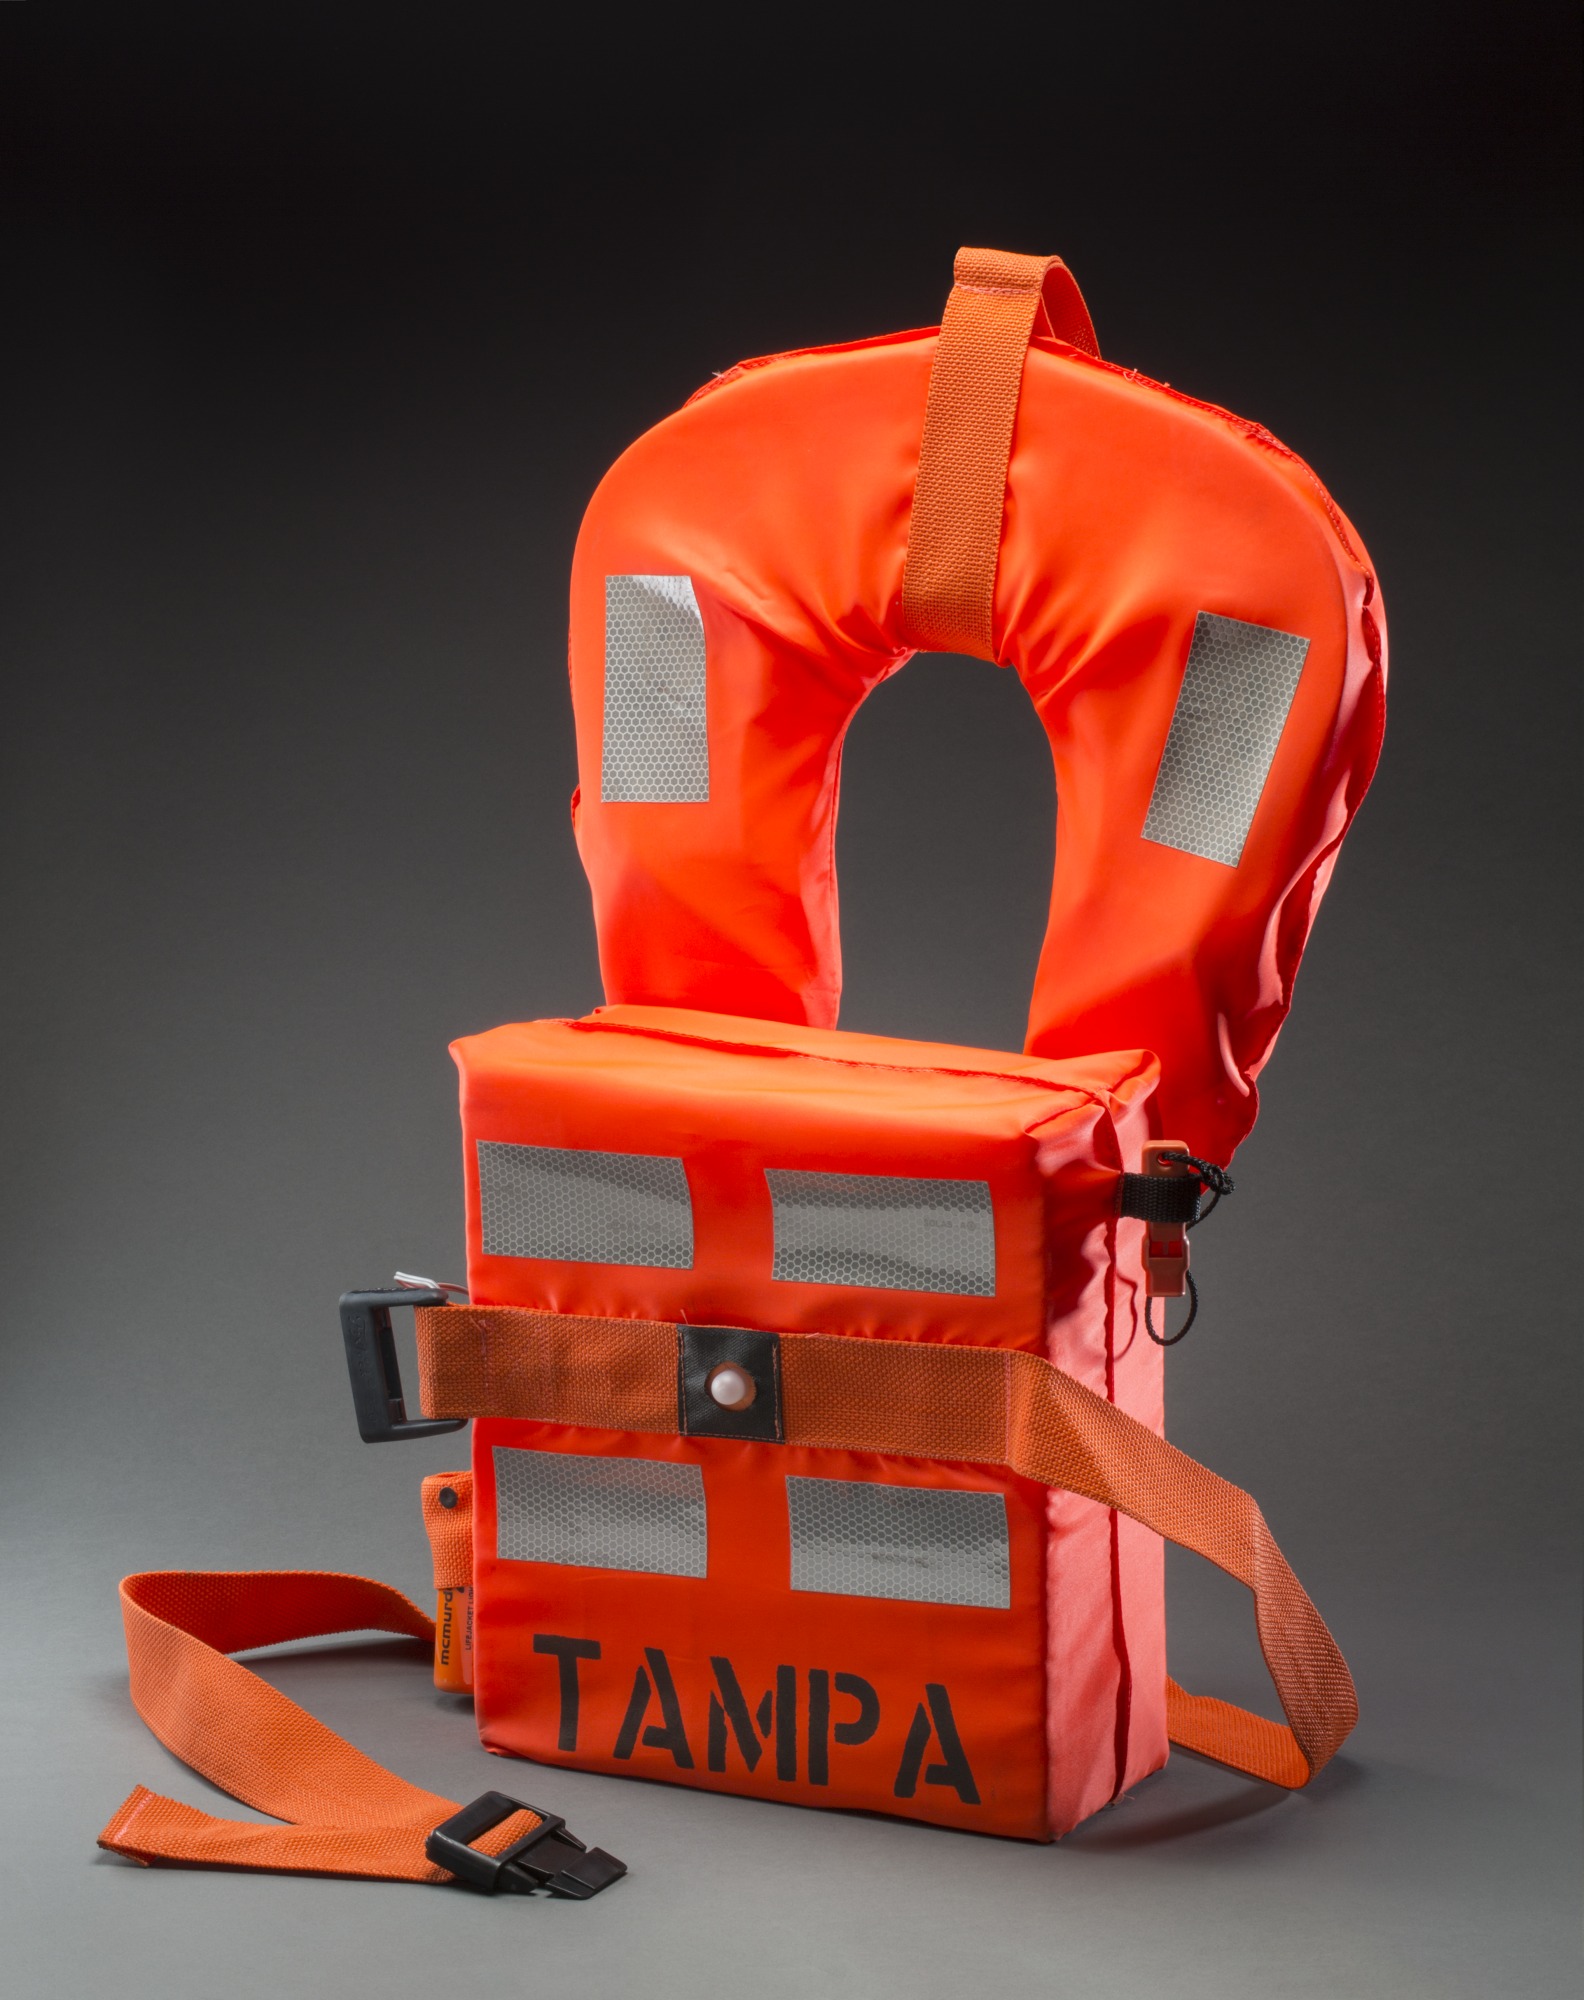 Life jacket from the MV Tampa.